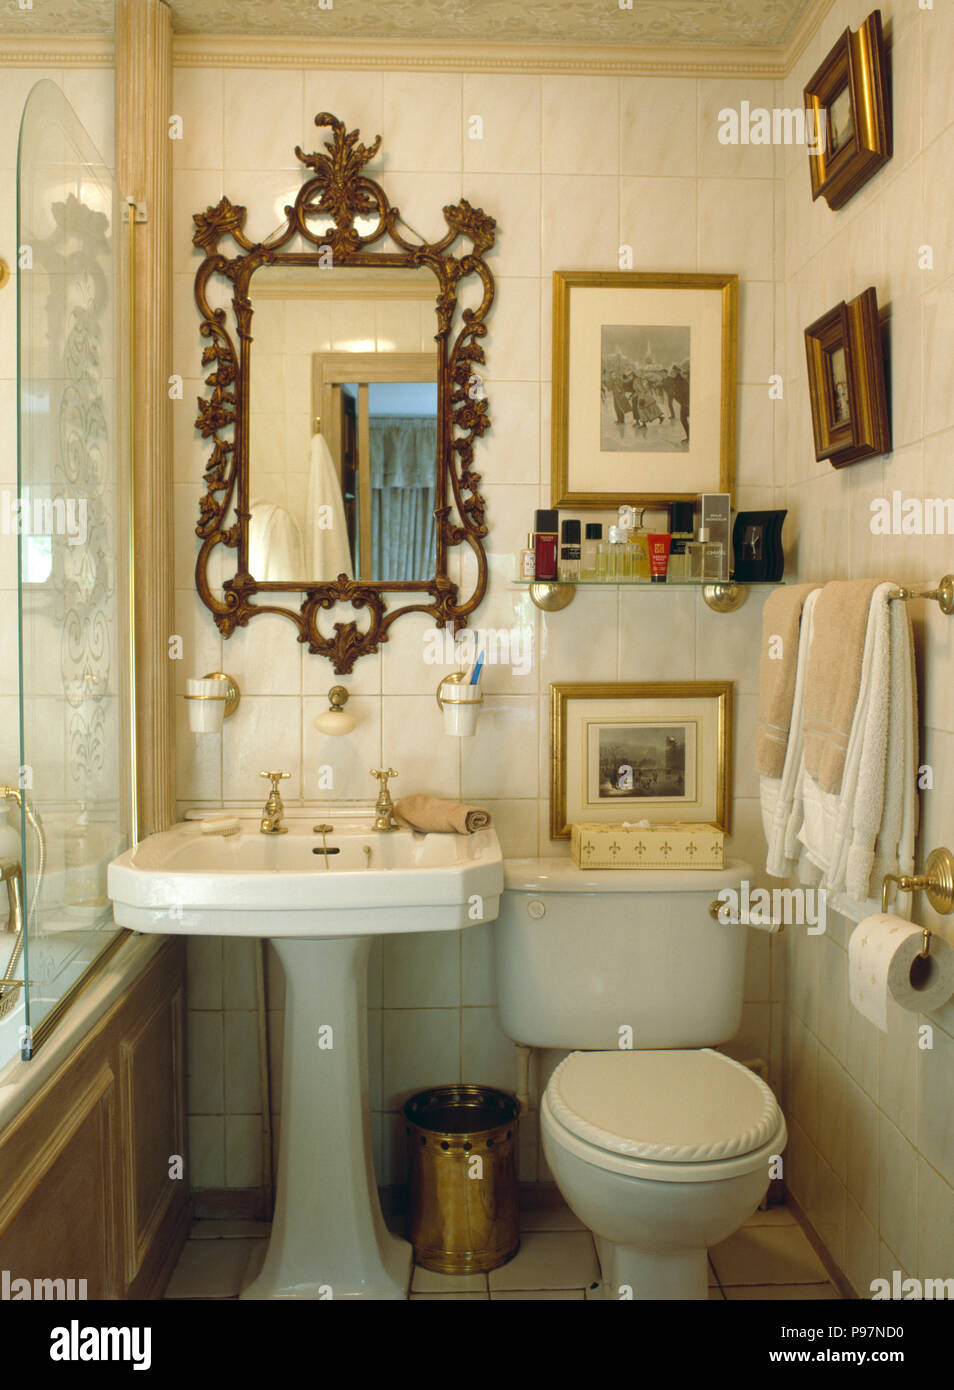 Antique mirror above white pedestal basin and toilet in narrow bathroom pictures on the walls Stock Photo